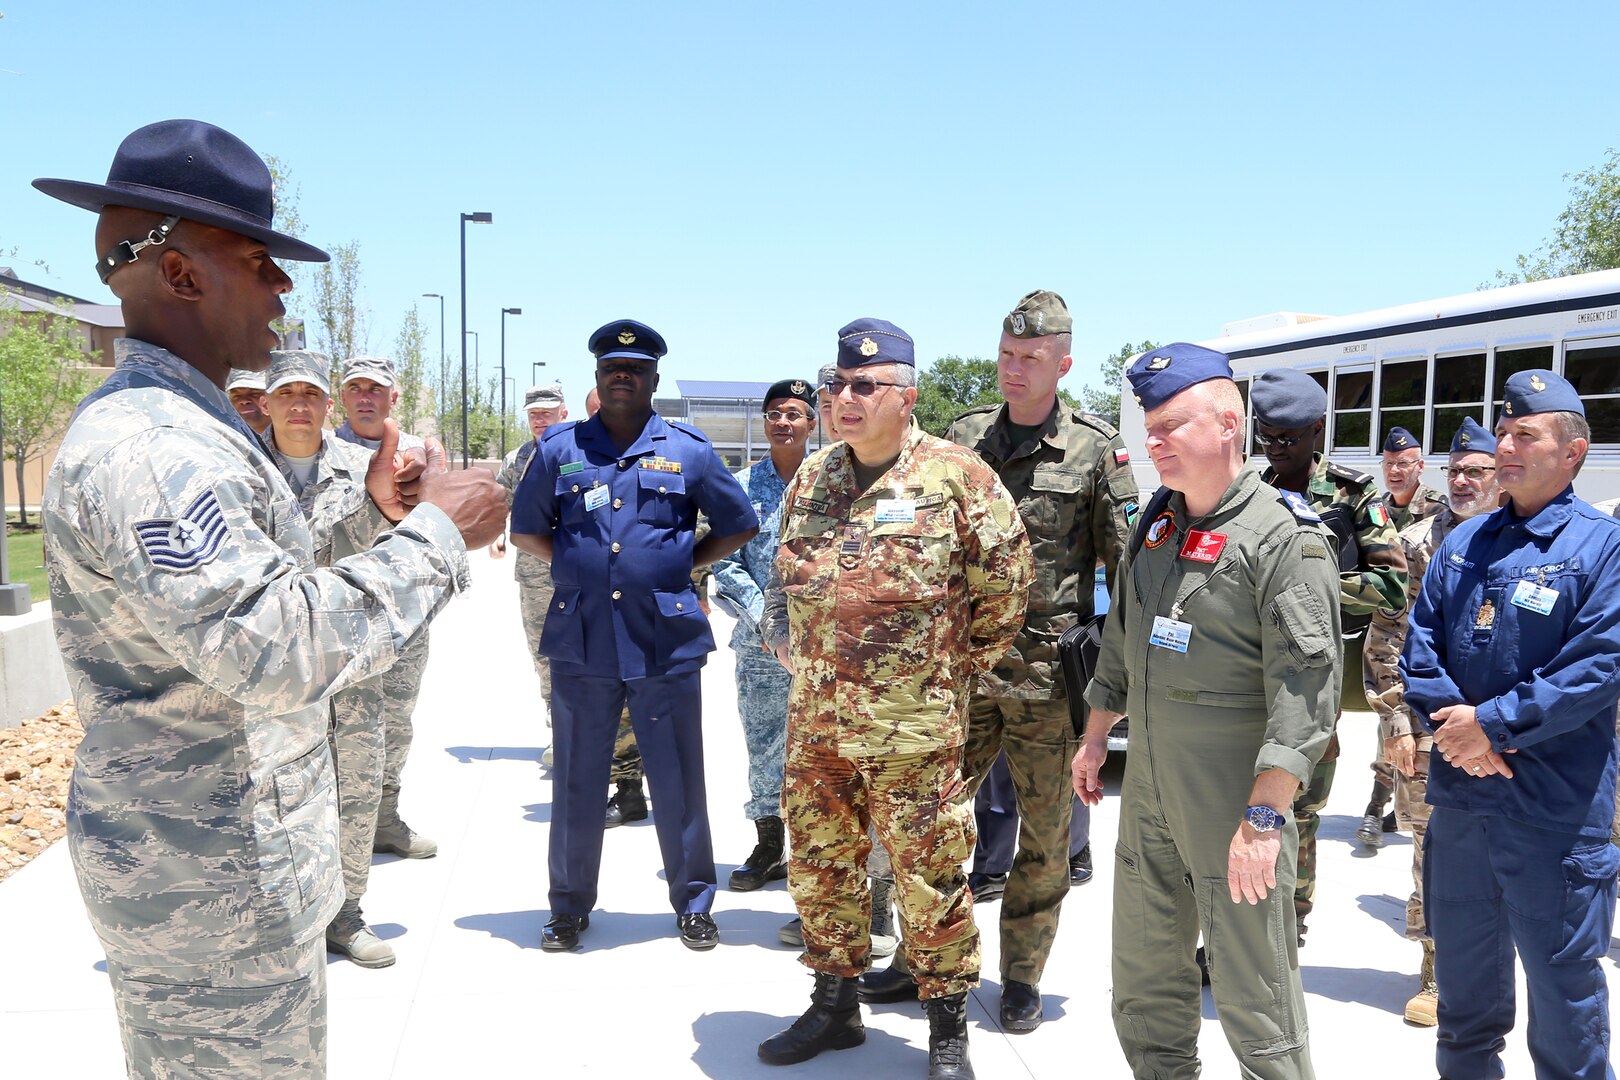 A Military Training Instructor speaks with senior enlisted leaders from the air forces of 24 countries as they tour basic military training facilities at Joint Base San Antonio-Lackland, Texas. Chief Master Sgt. of the Air Force James Cody hosted an international senior enlisted leader summit May 13-16. (U.S. Air Force photo by Joshua Rodriguez)